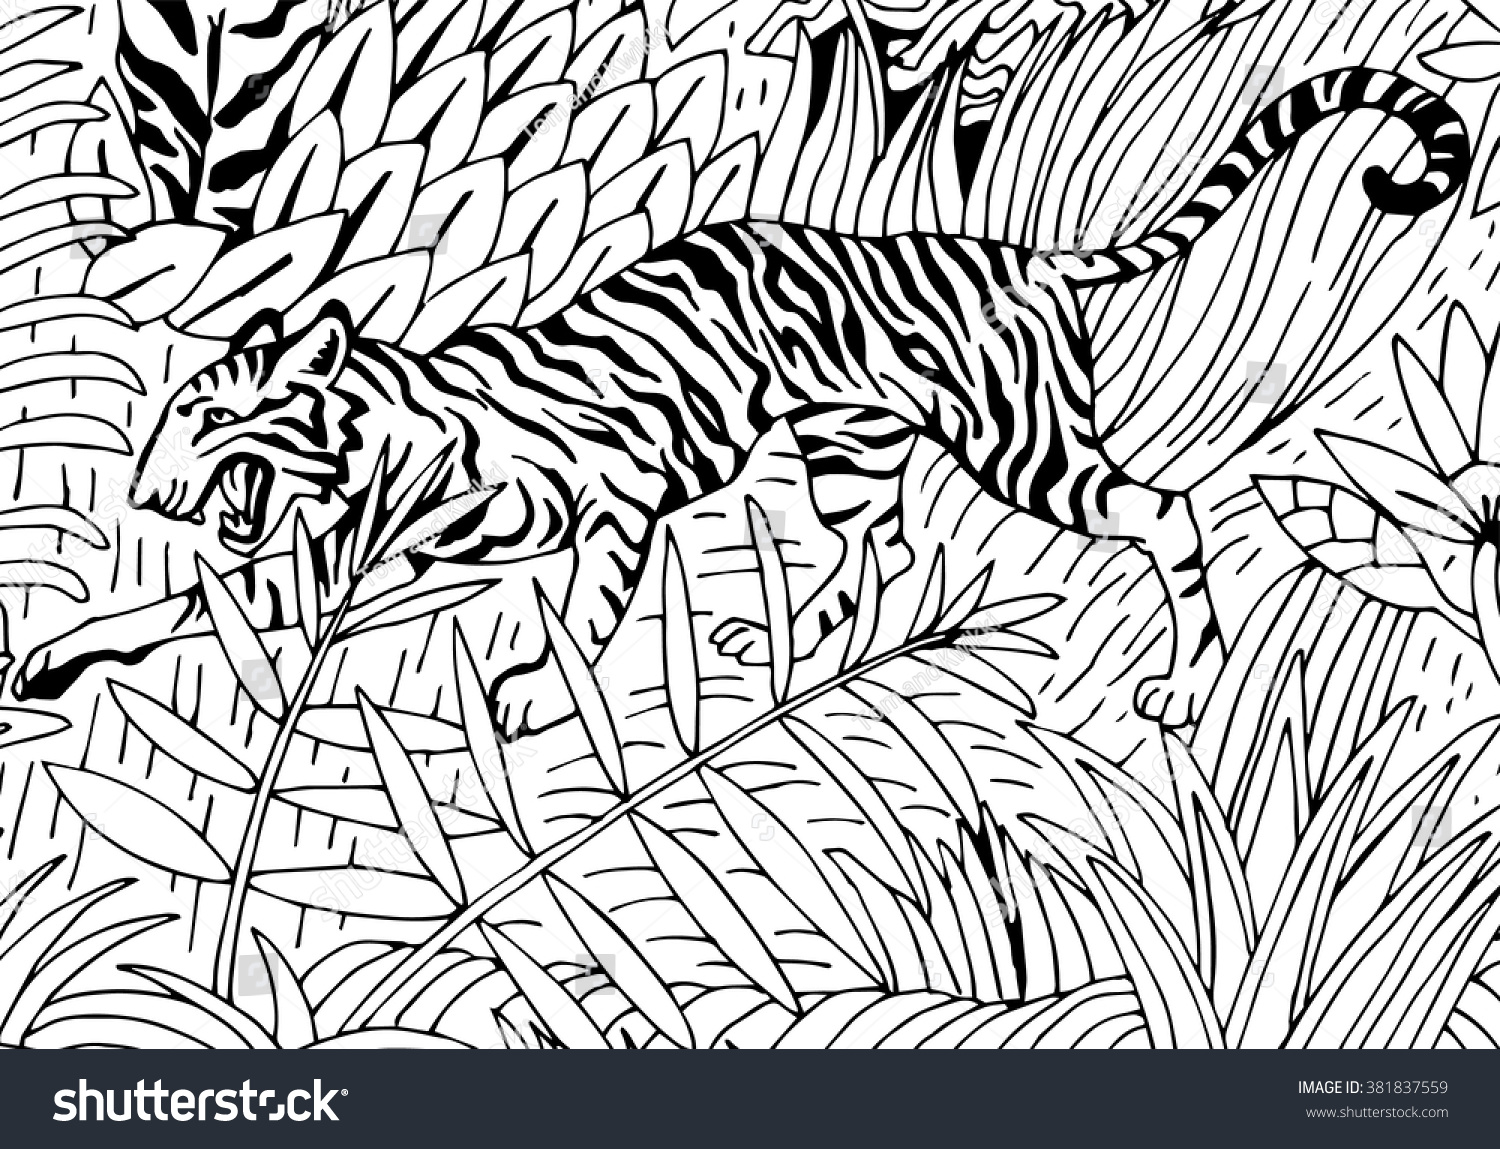 Tiger Jungle Coloring Page Stock Vector Royalty Free 20 ...